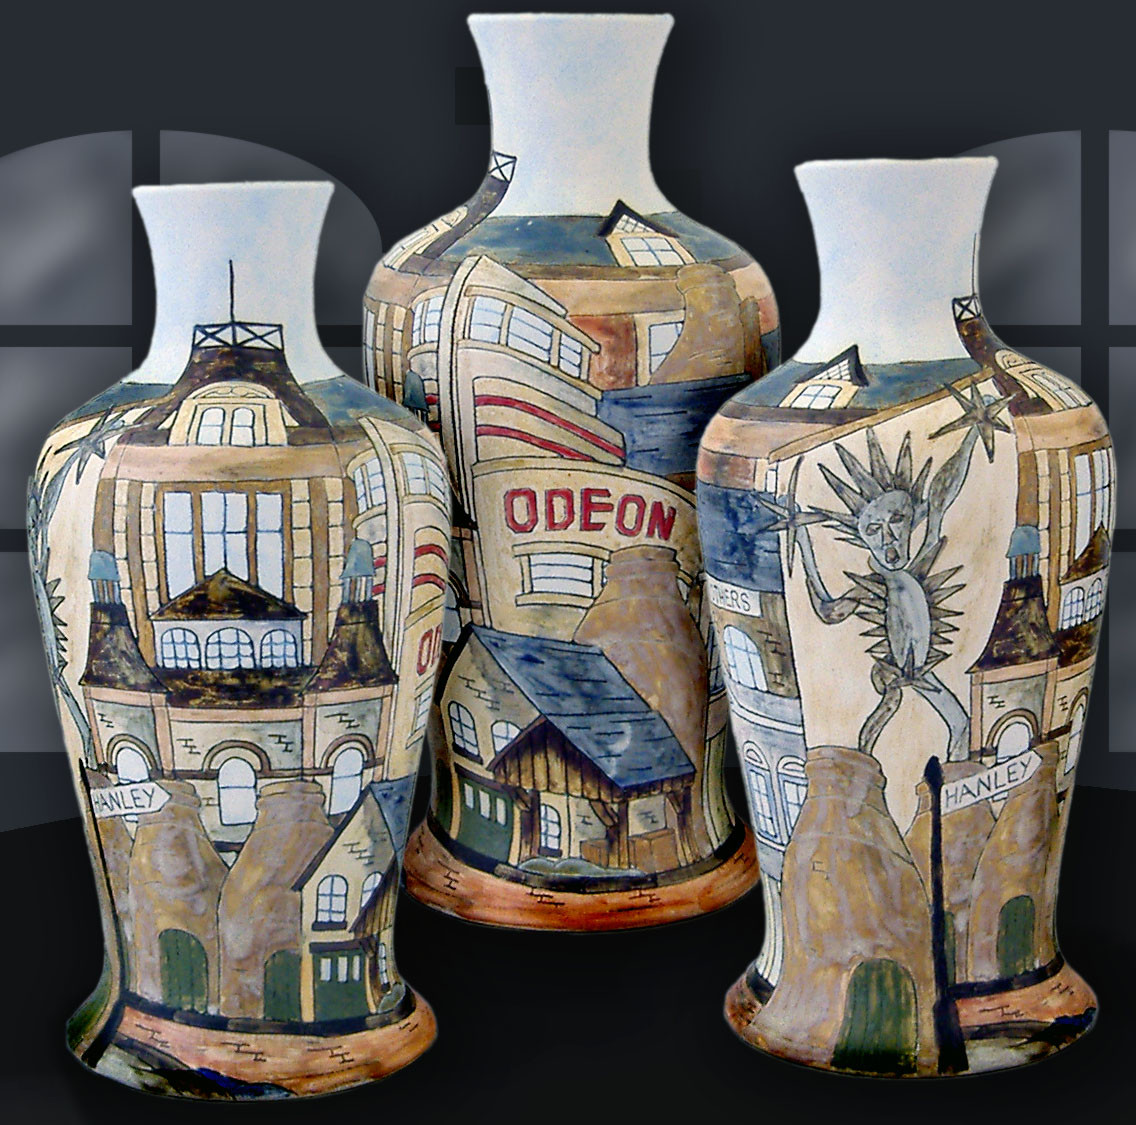 pottery barn tuscan terracotta vases of burslem pottery designed vase shop stoke on trent inside there are six towns that make up the city of stoke on trent this is the 30cm vase showing the well know landmarks of hanley is the largest and described as